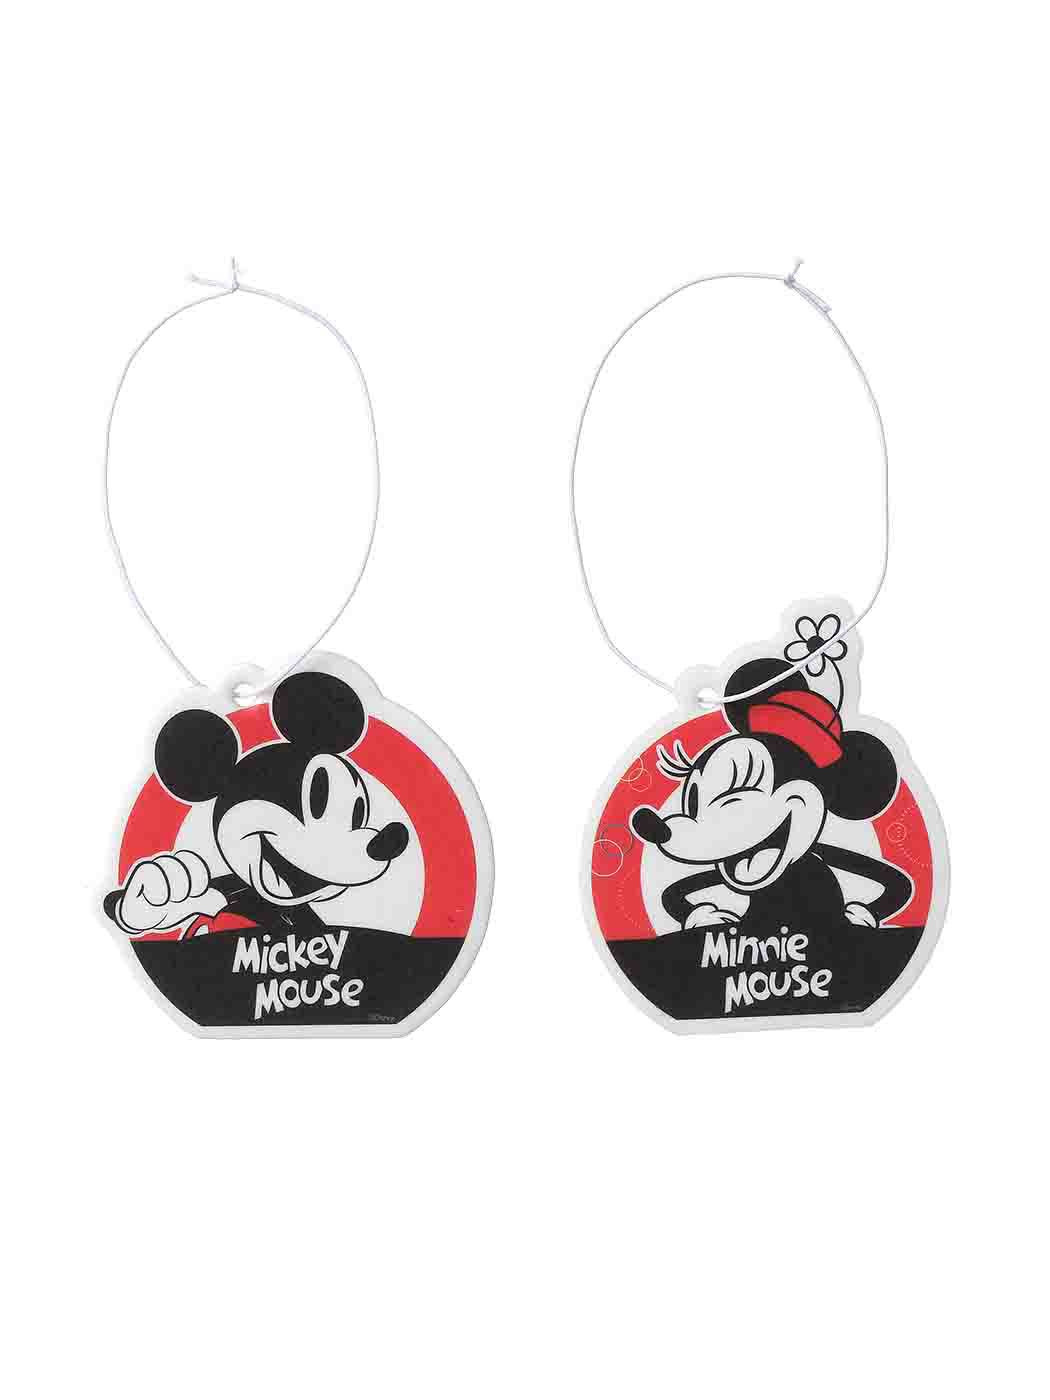 MINISO MICKEY MOUSE COLLECTION 2.0 HANGING CAR SCENT DIFFUSER-2PCS(SANDALWOOD) 2010516911101 SCENT DIFFUSER